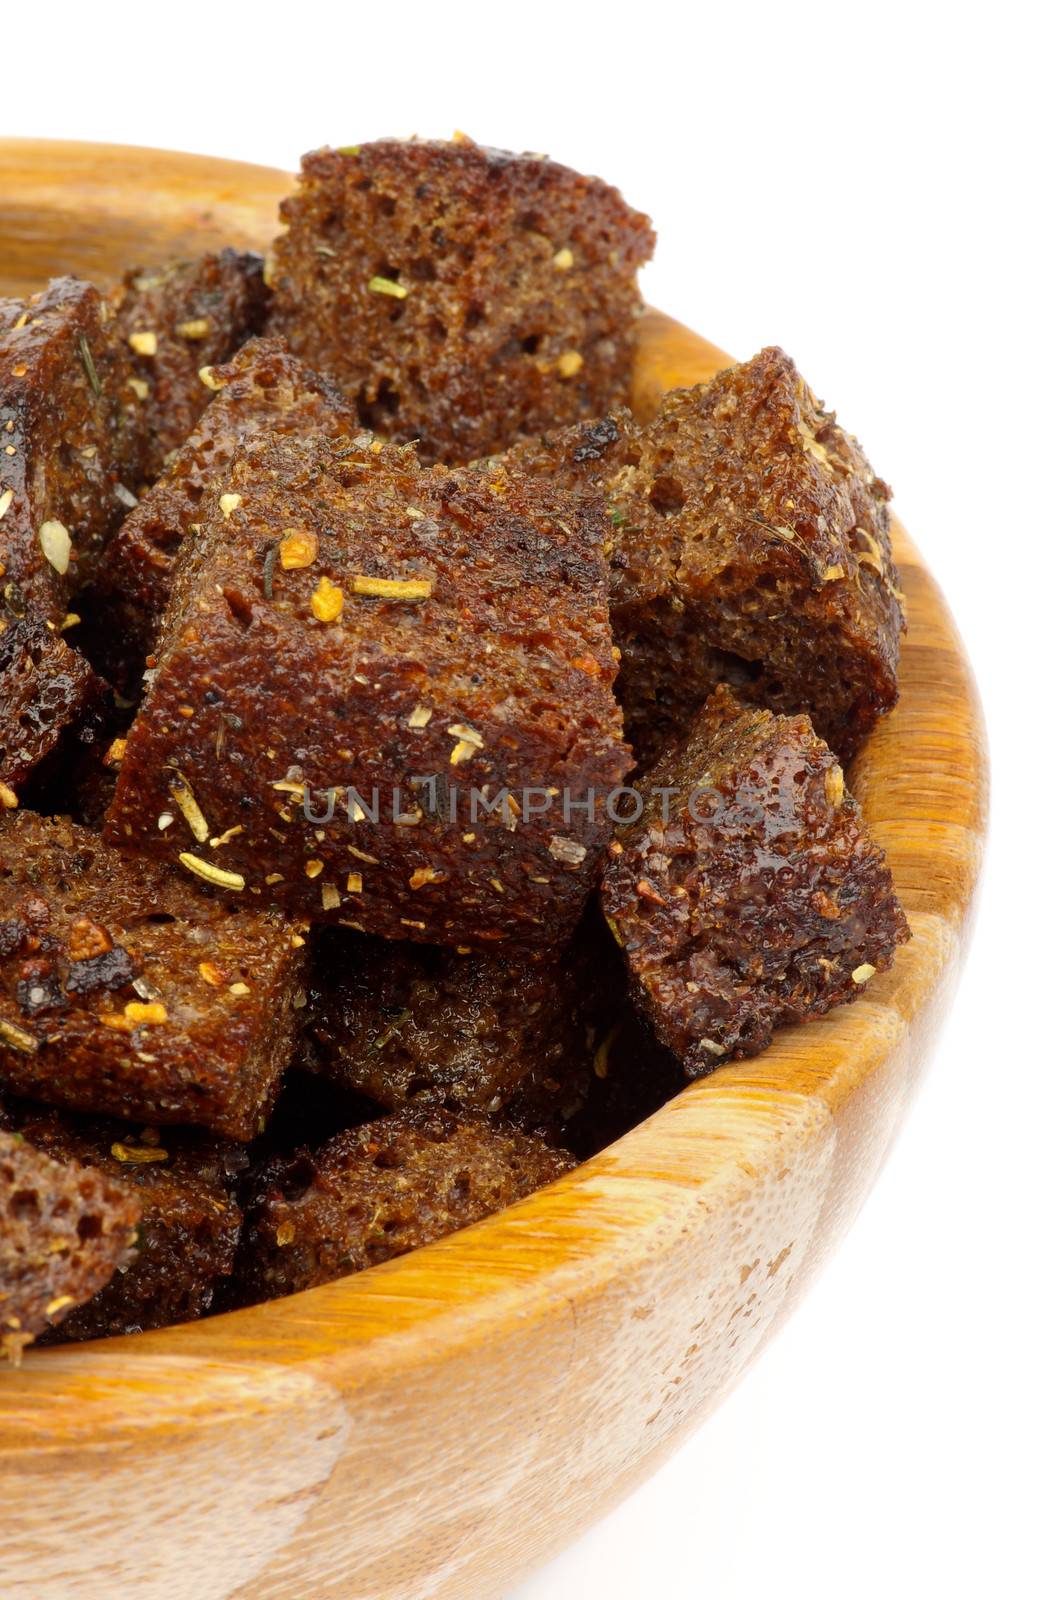 Tasty Whole Grain Bread Croutons with Garlic and Spices closeup in Wooden Bowl